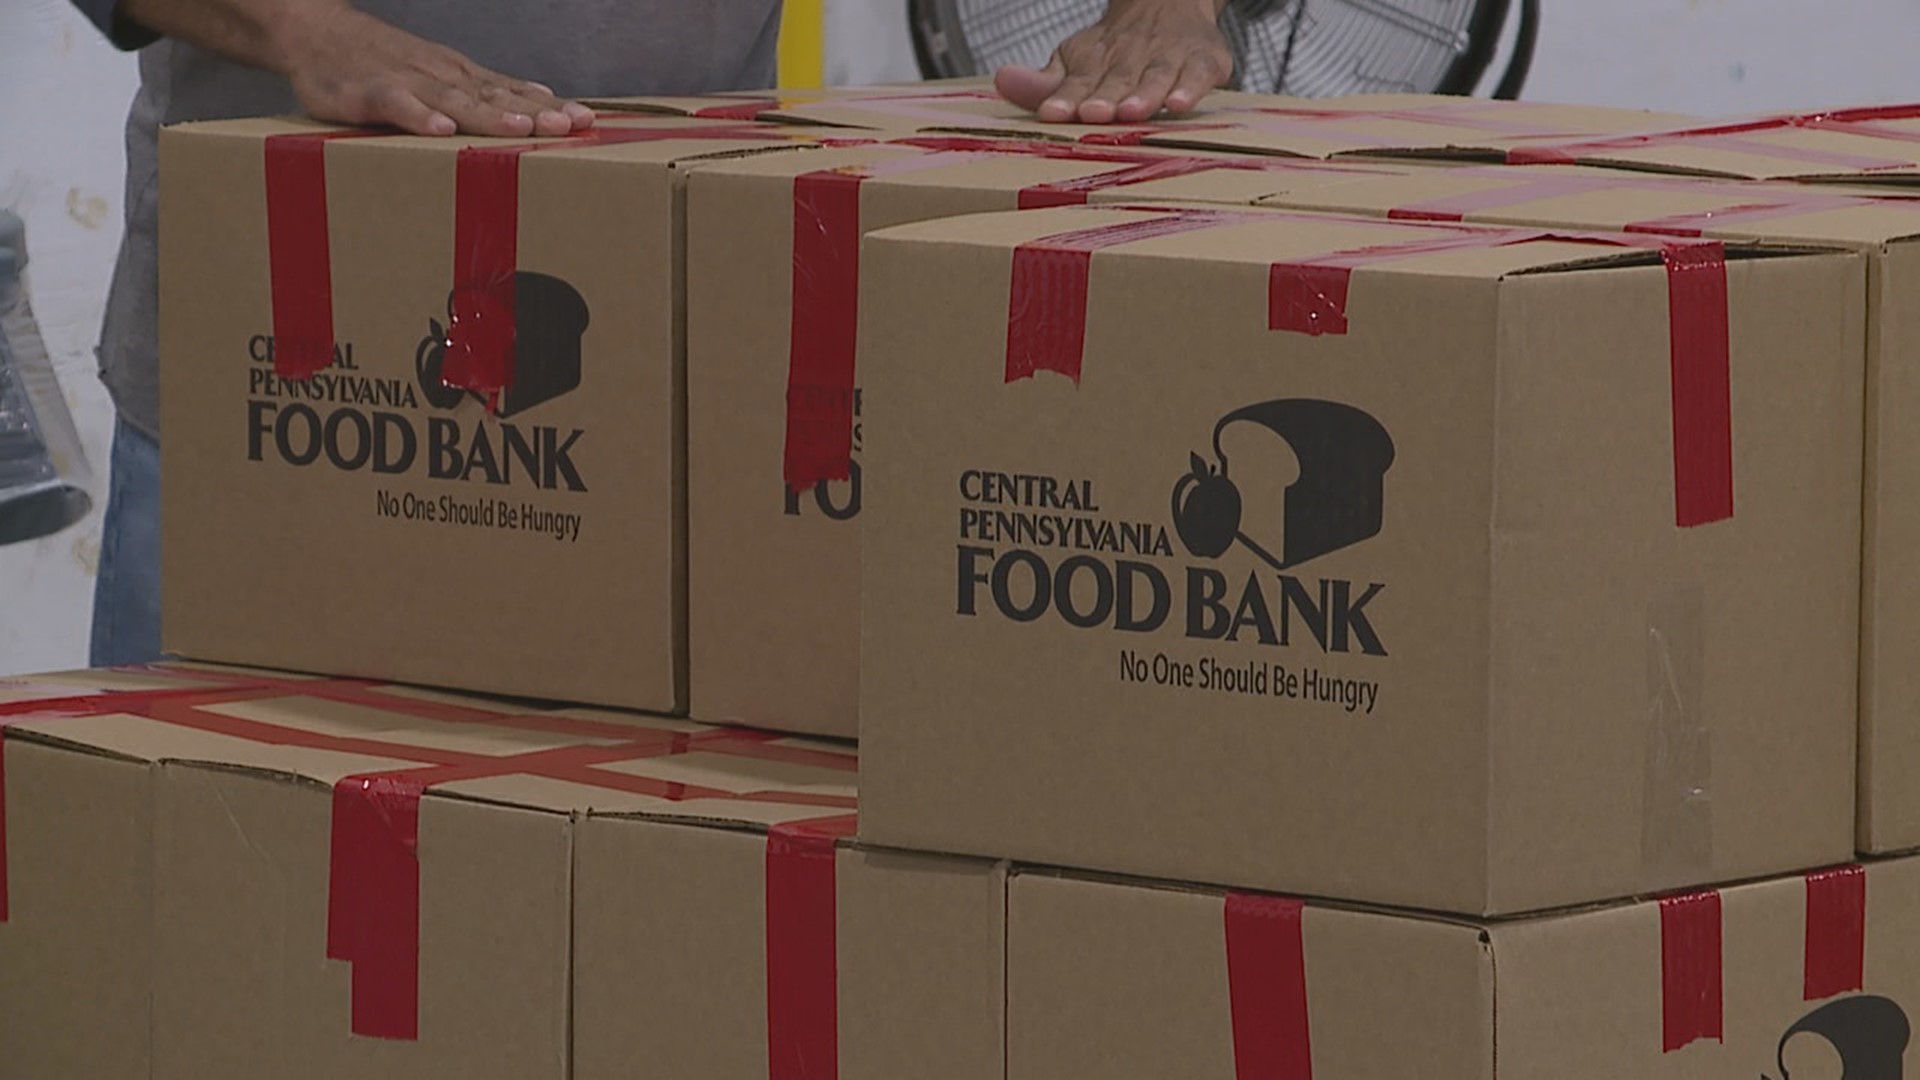 Despite September being Hunger Action Month, food banks continue to ask for donations as food insecurity rises across Pennsylvania.